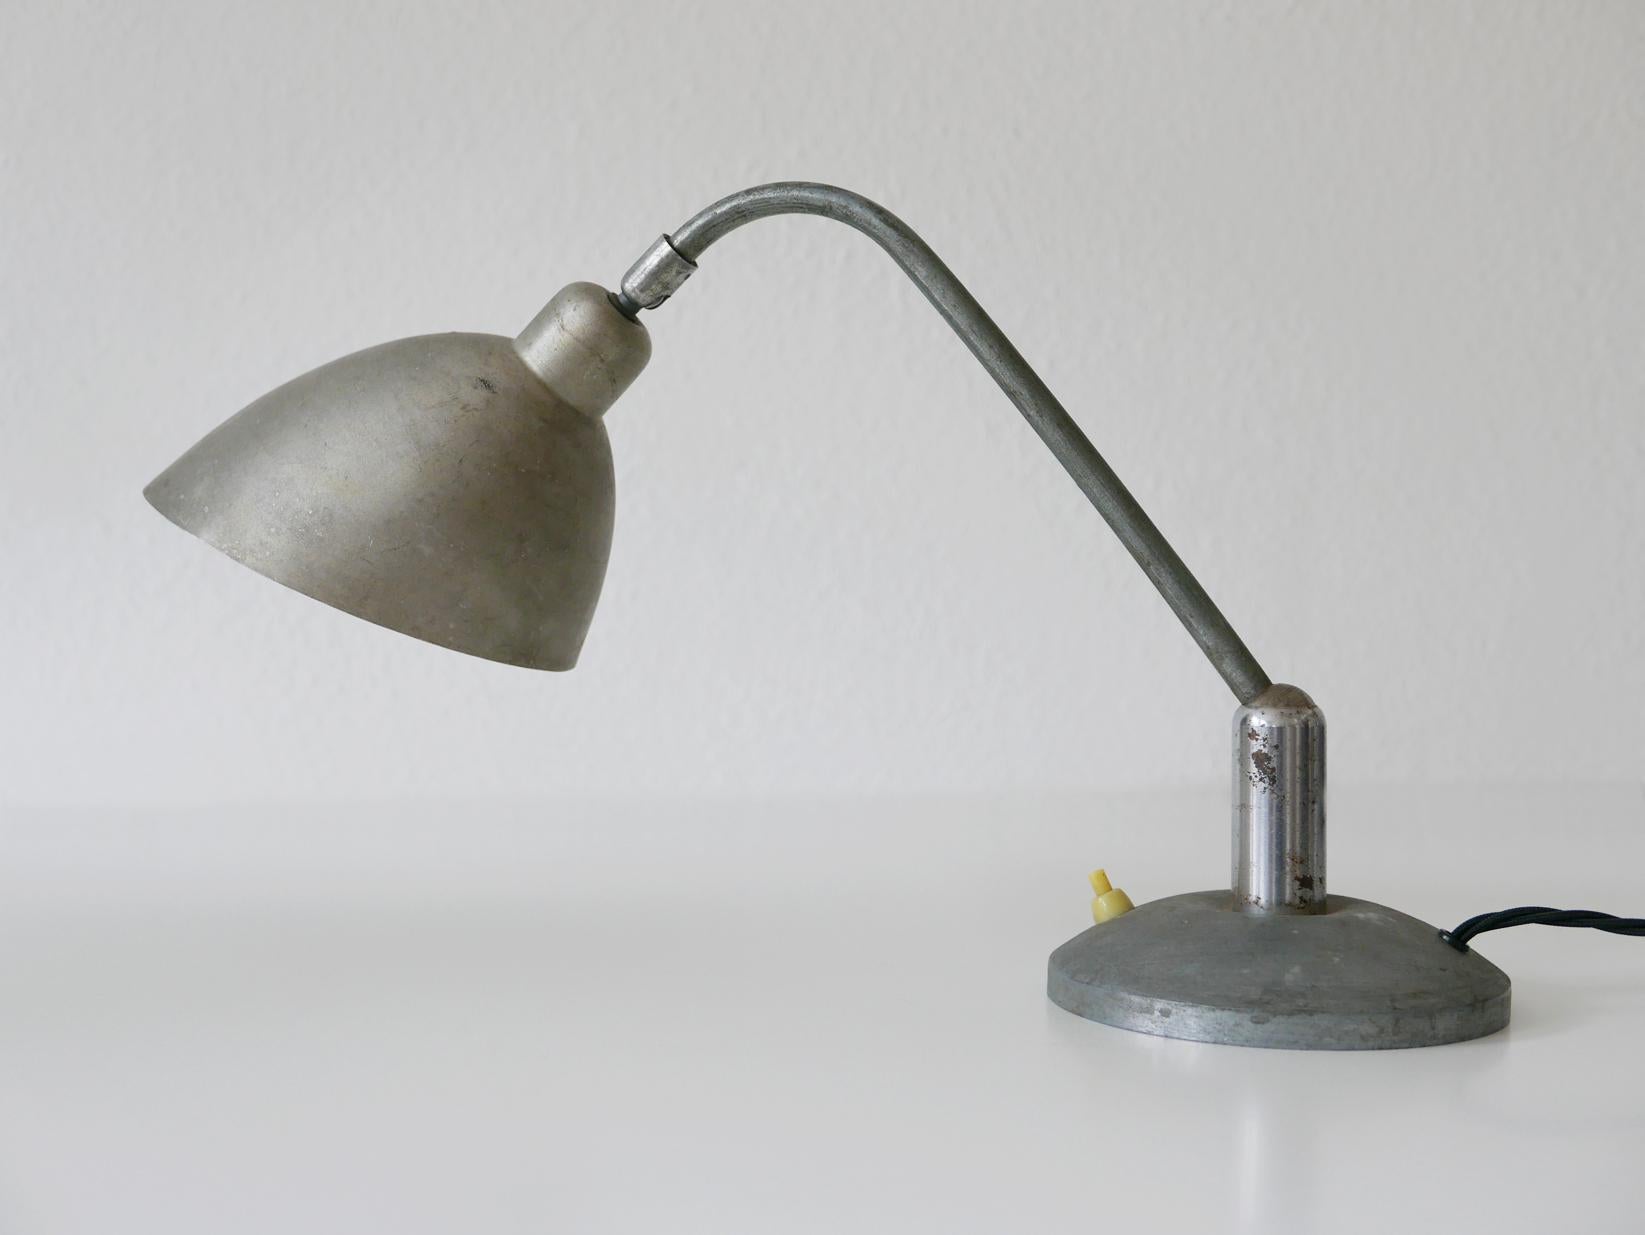 Rare Czech Functionalist or Bauhaus Table Lamp by Franta ‘Frantisek’ Anyz, 1920s For Sale 6